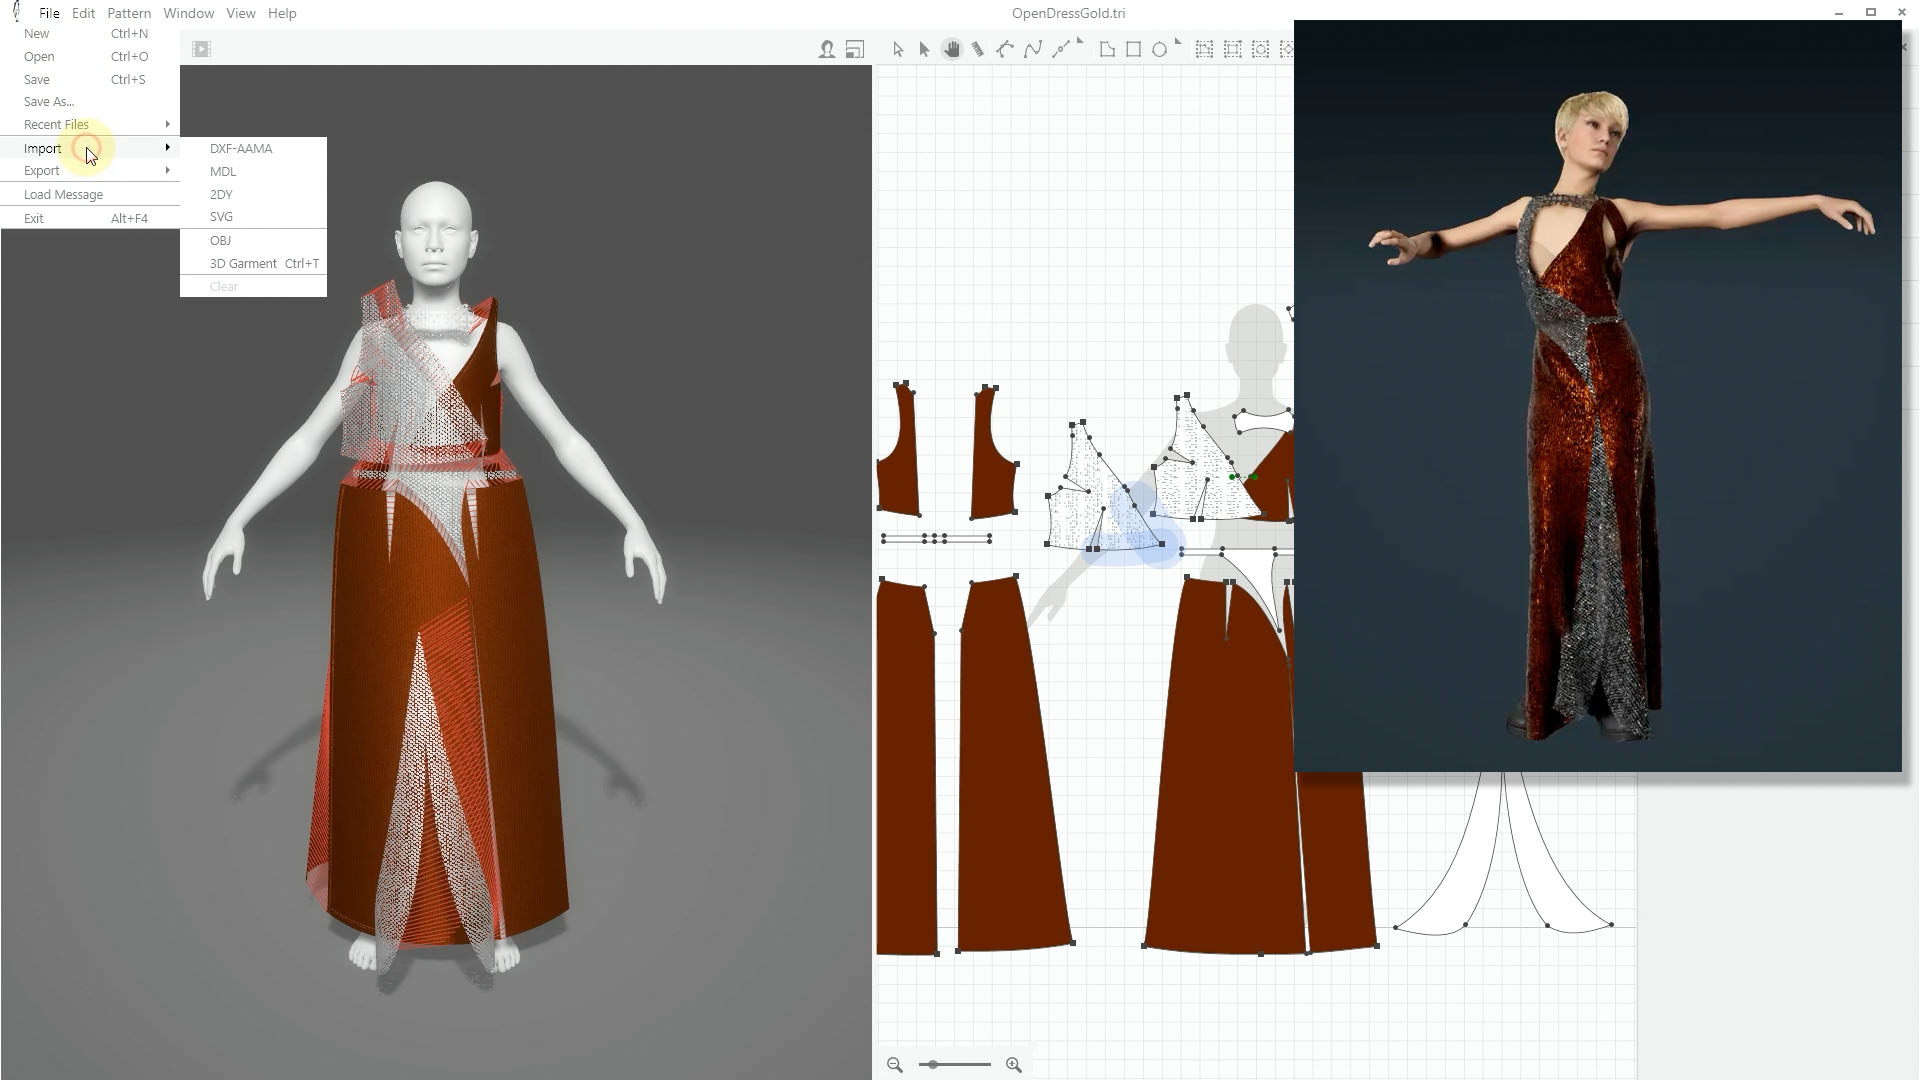 Trimirror looks to dress MetaHumans in real-time - fxguide